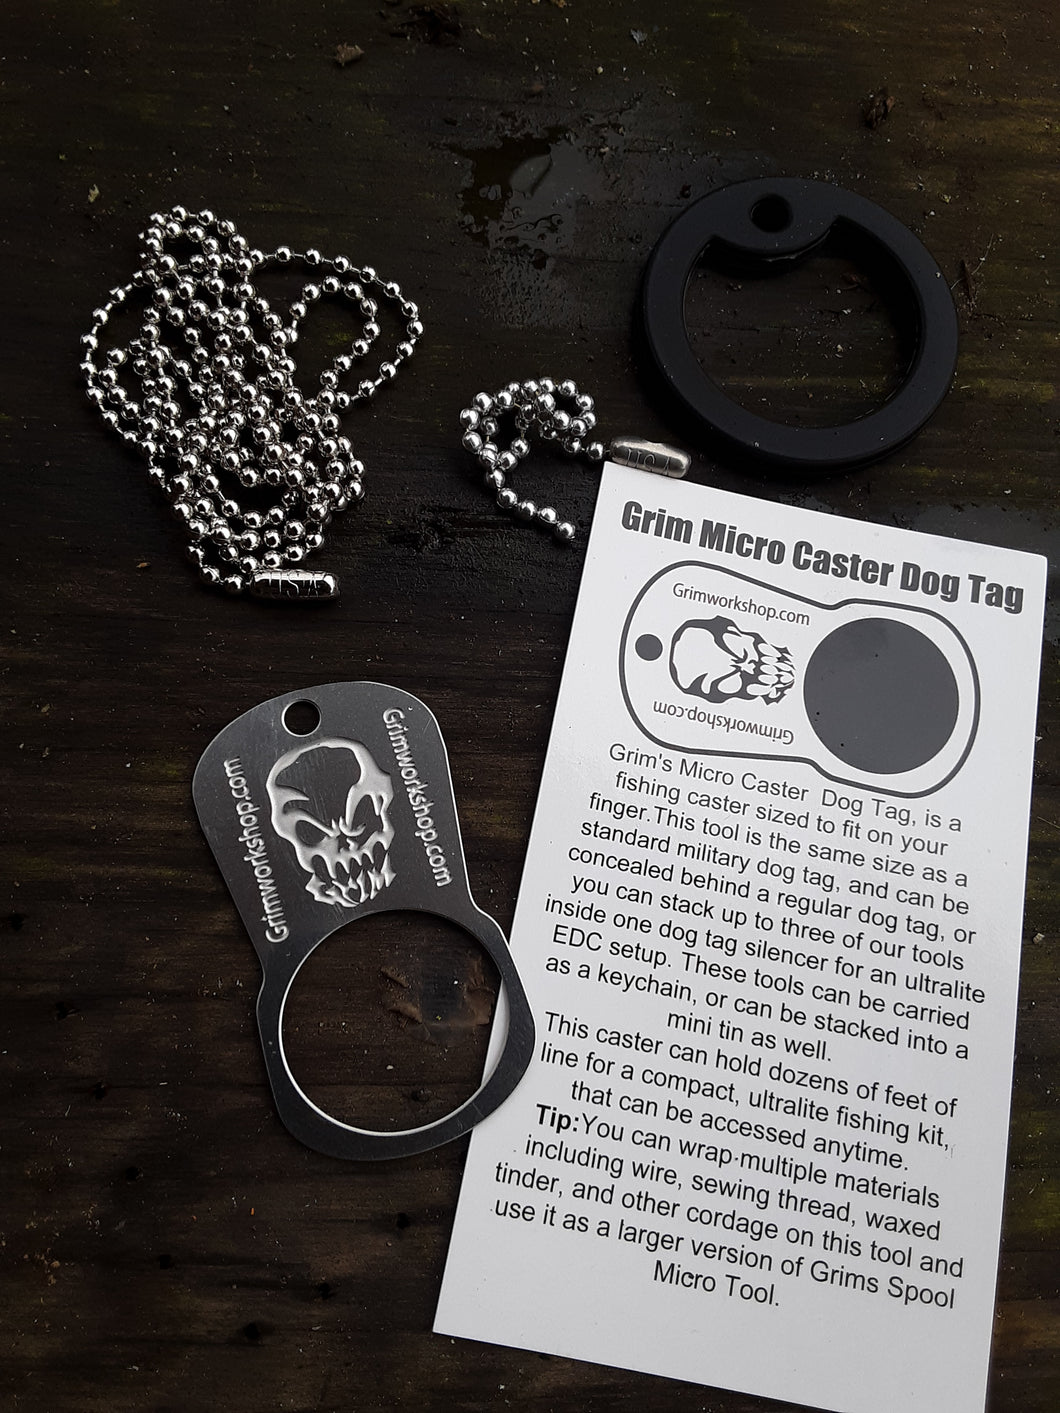 Micro caster fishing dog tag from Grimworkshop